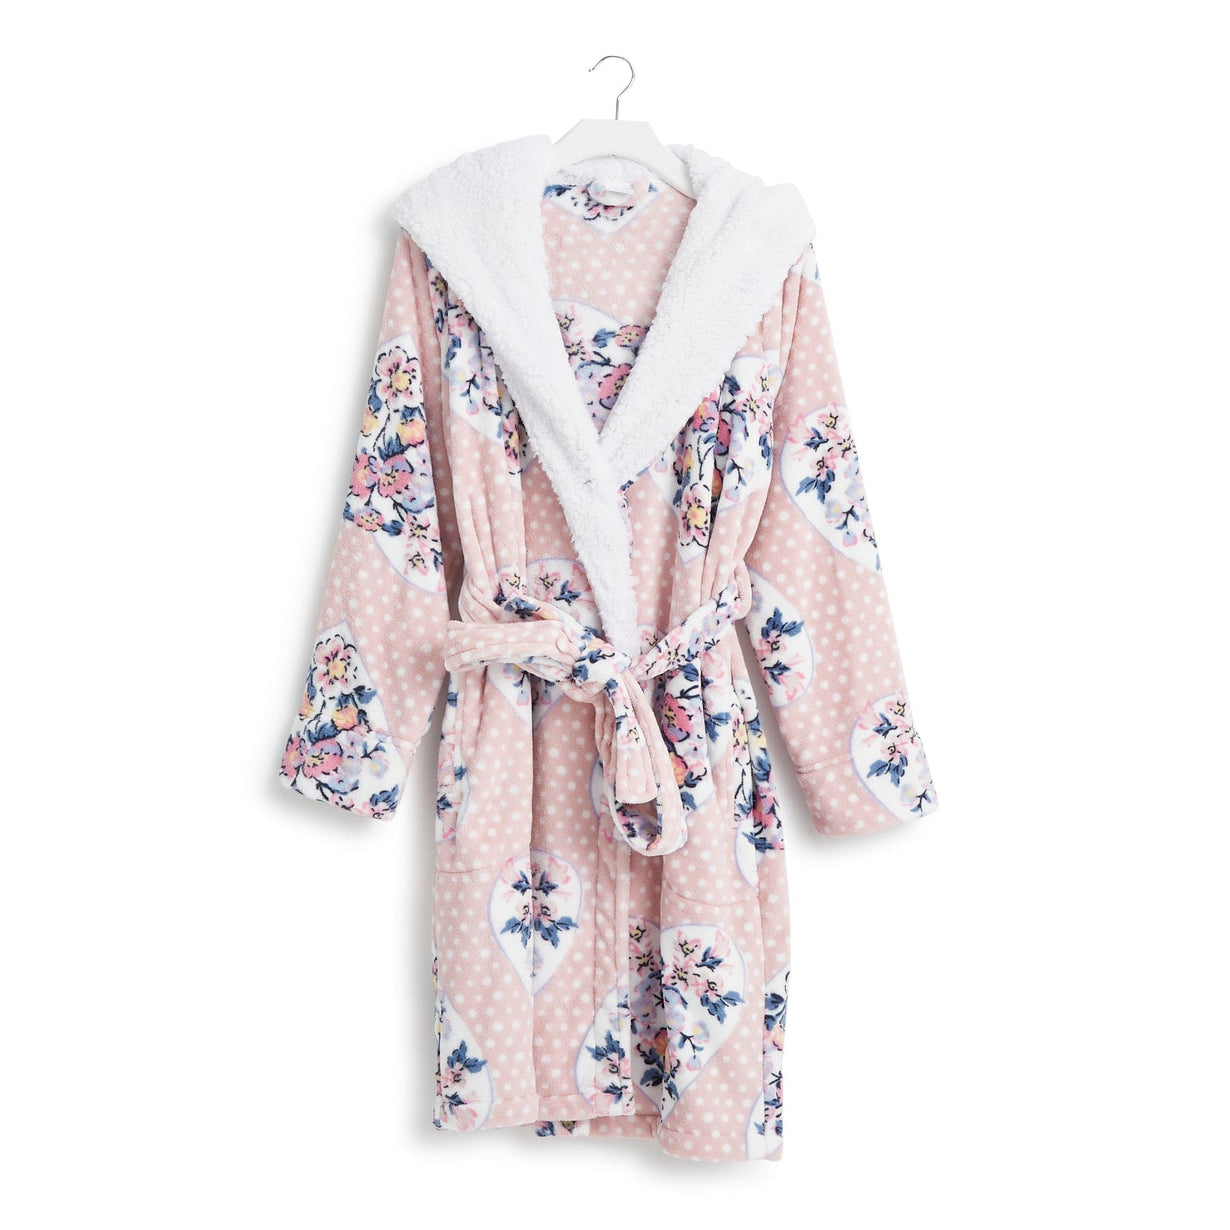 Sherpa lined pink robe with hood and floral hearts pattern